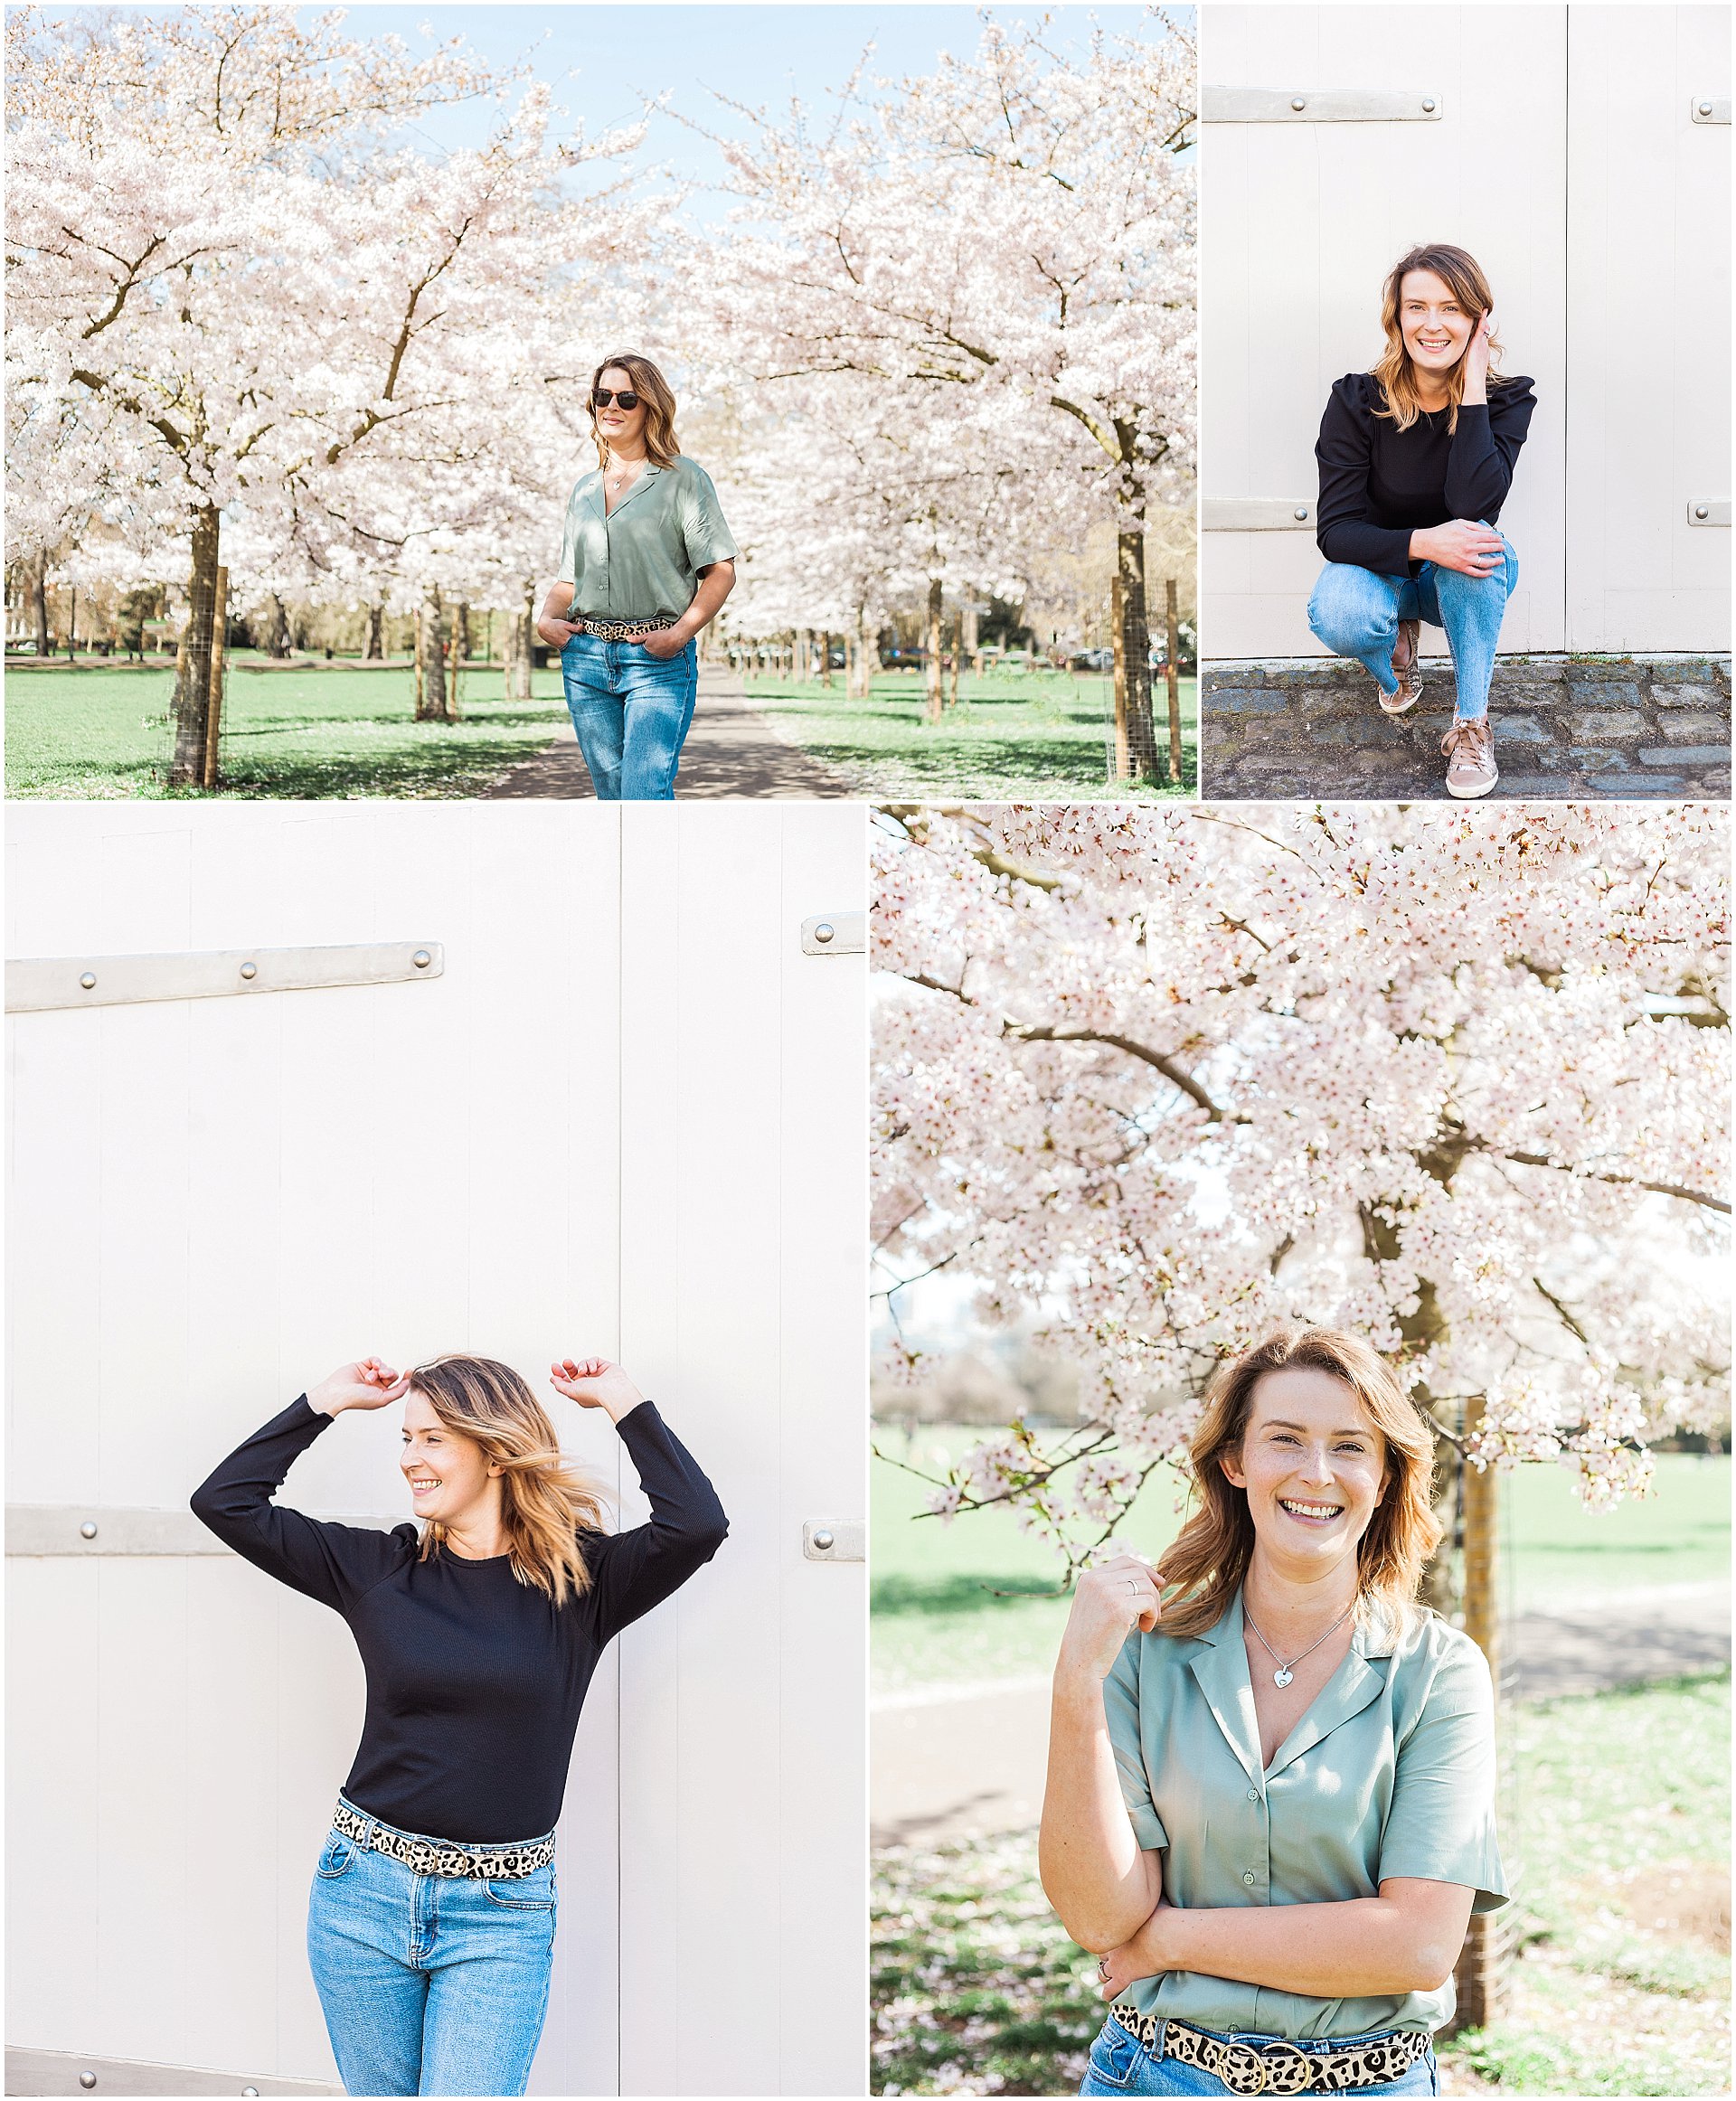 Beautiful Spring Brand Shoot in London with AKP Branding Stories.